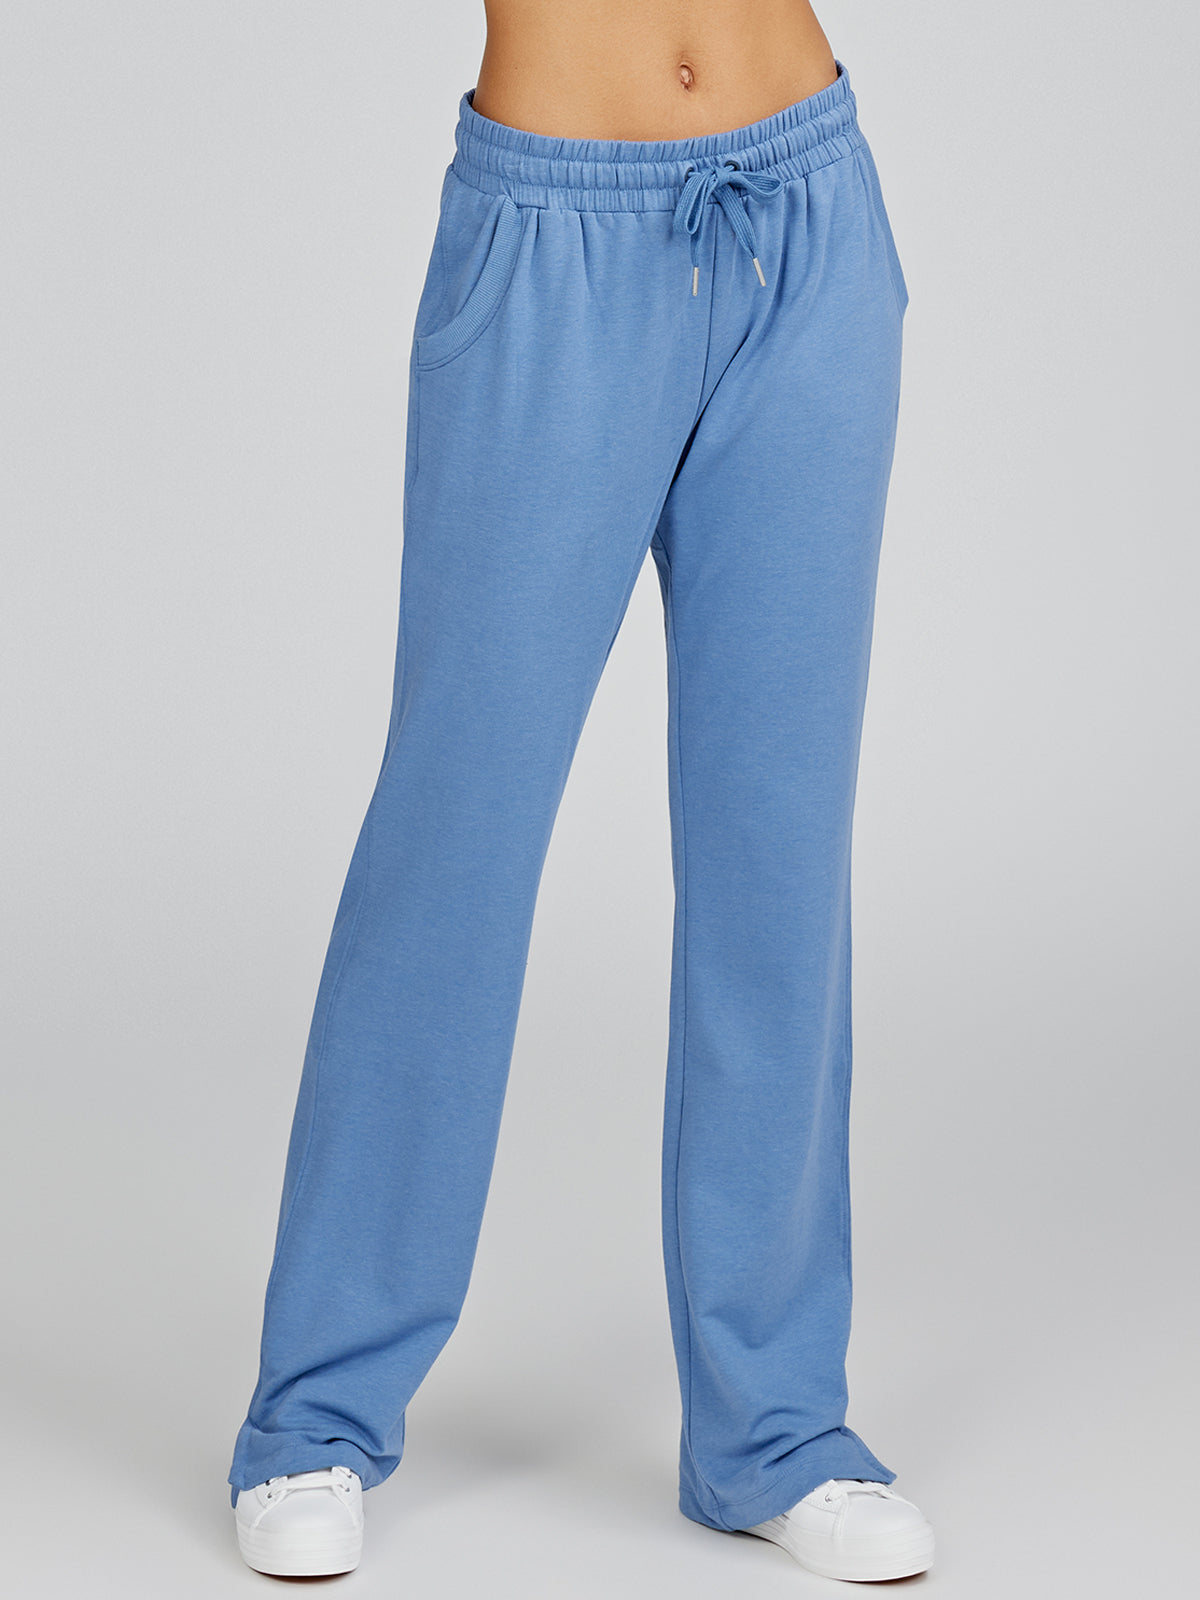 Uniqlo Singapore - Introducing the Women's Jersey Jogger Pants in